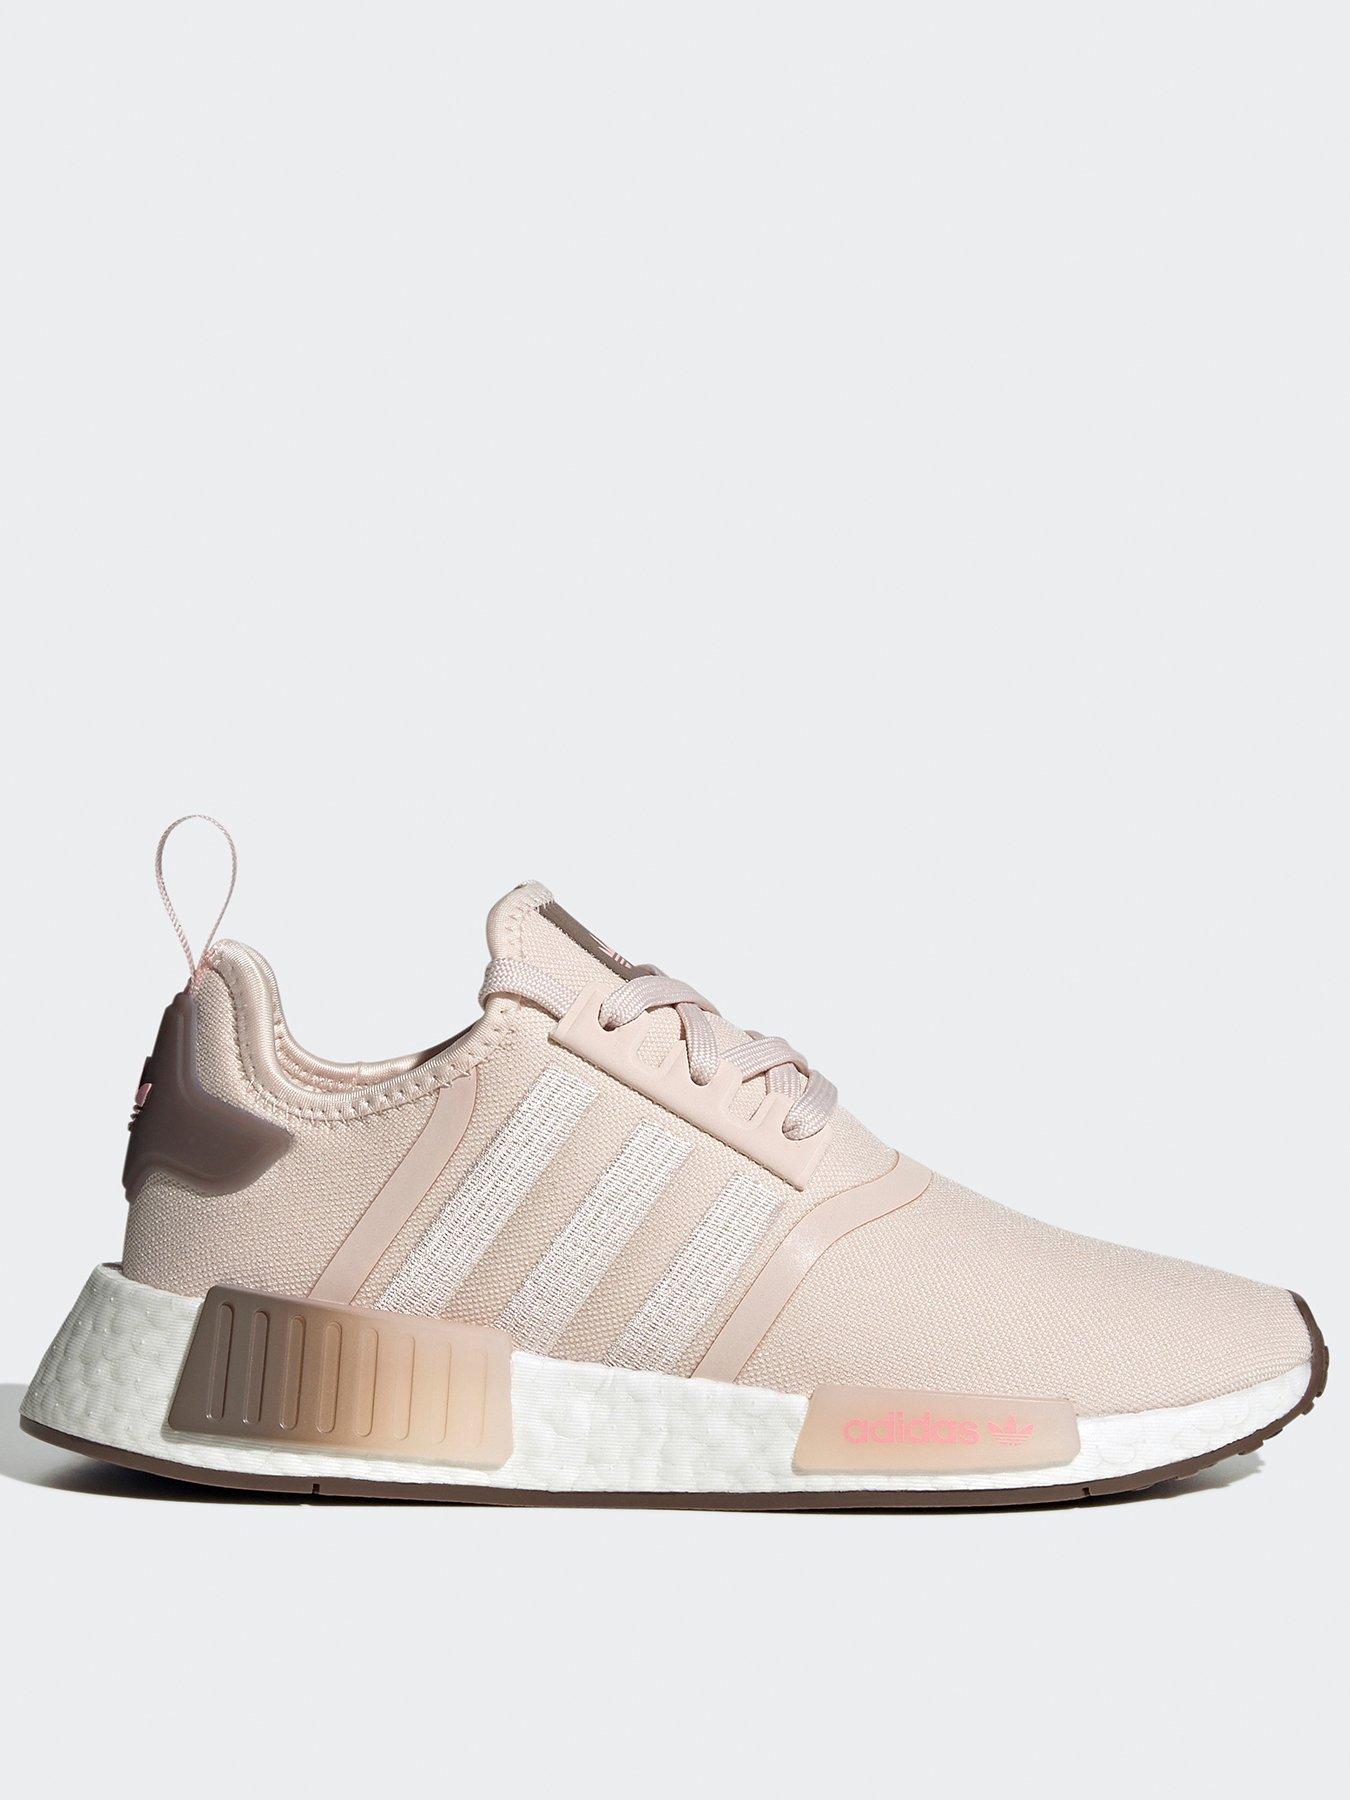 sej Mobilisere atlet adidas Originals NMD | Adidas | Trainers | Women | www.very.co.uk